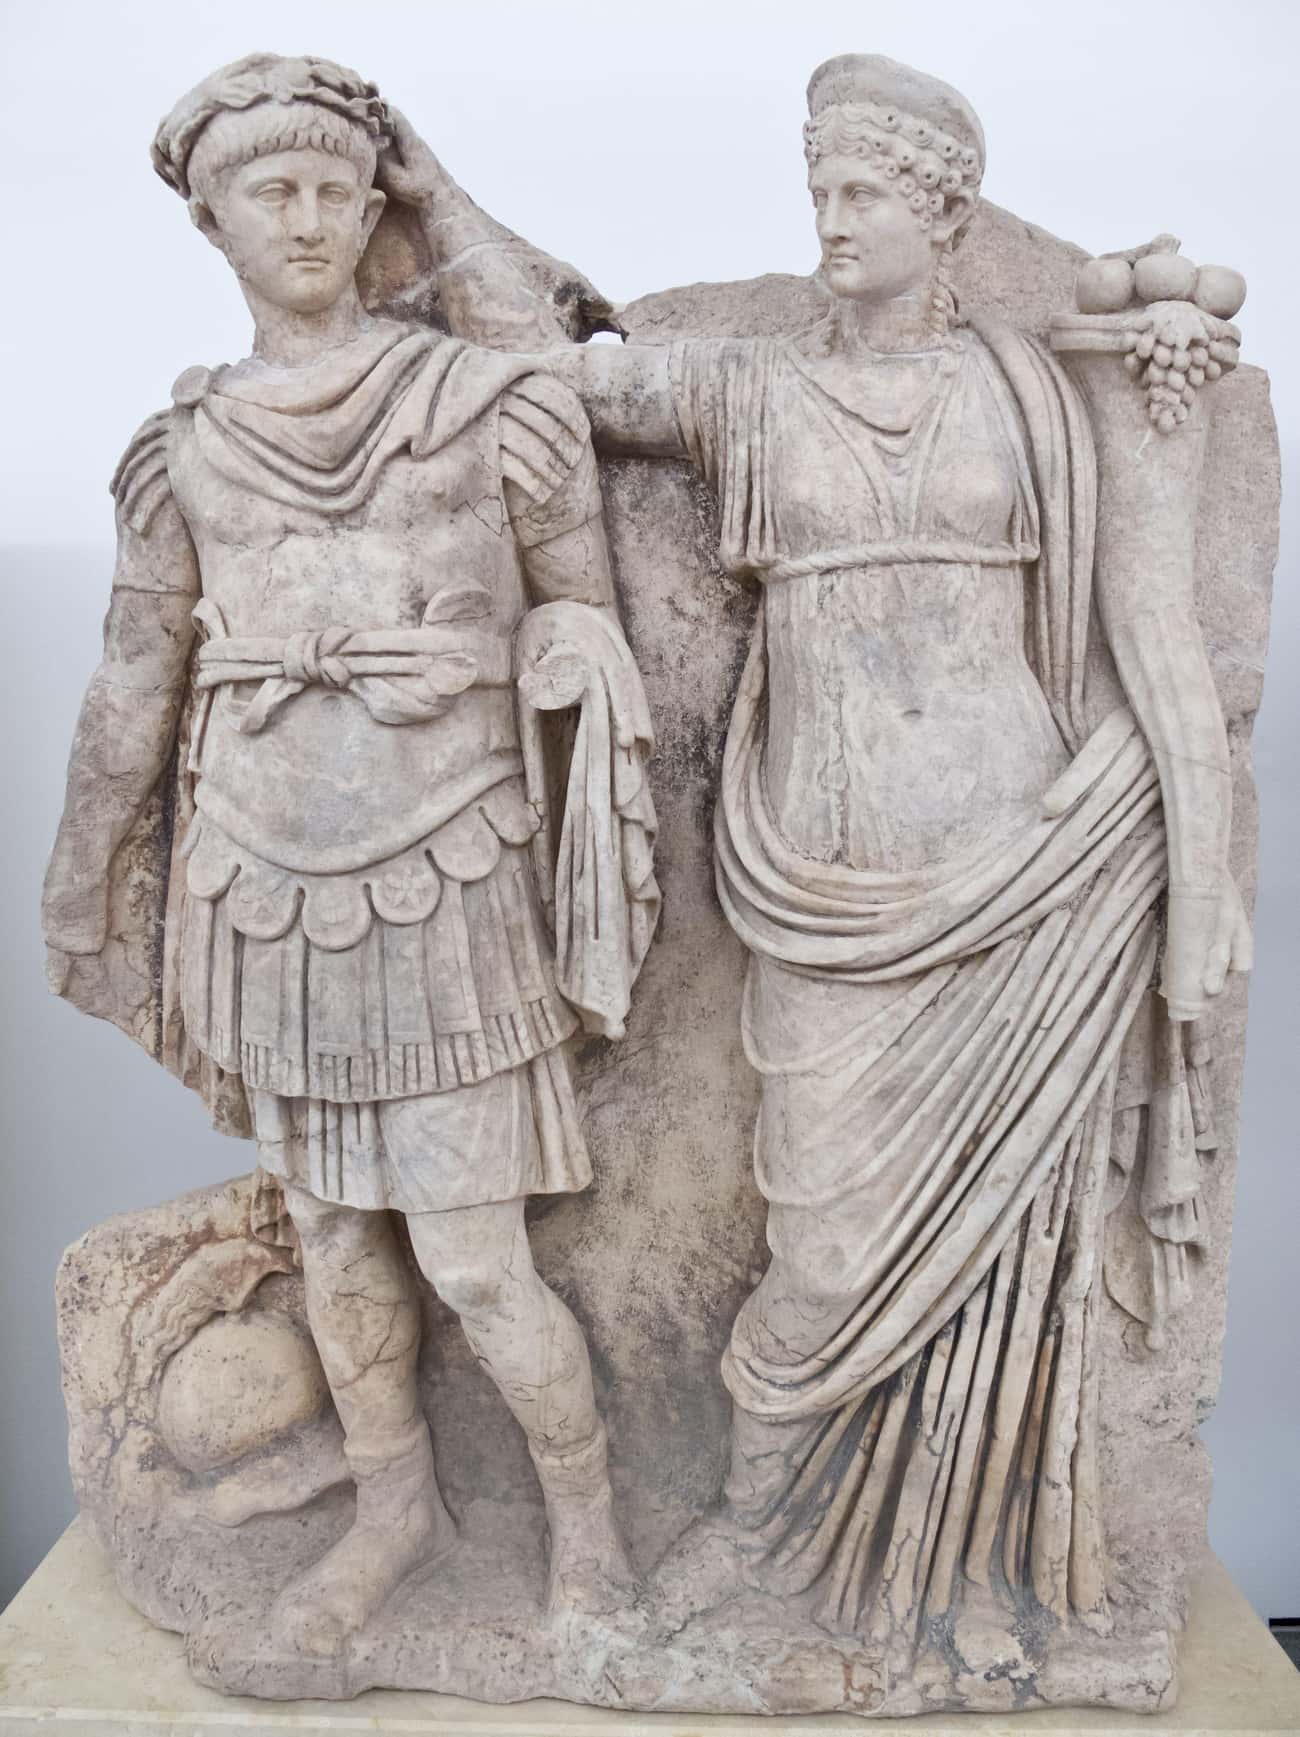 Agrippina Seduced Her Uncle Into Marriage